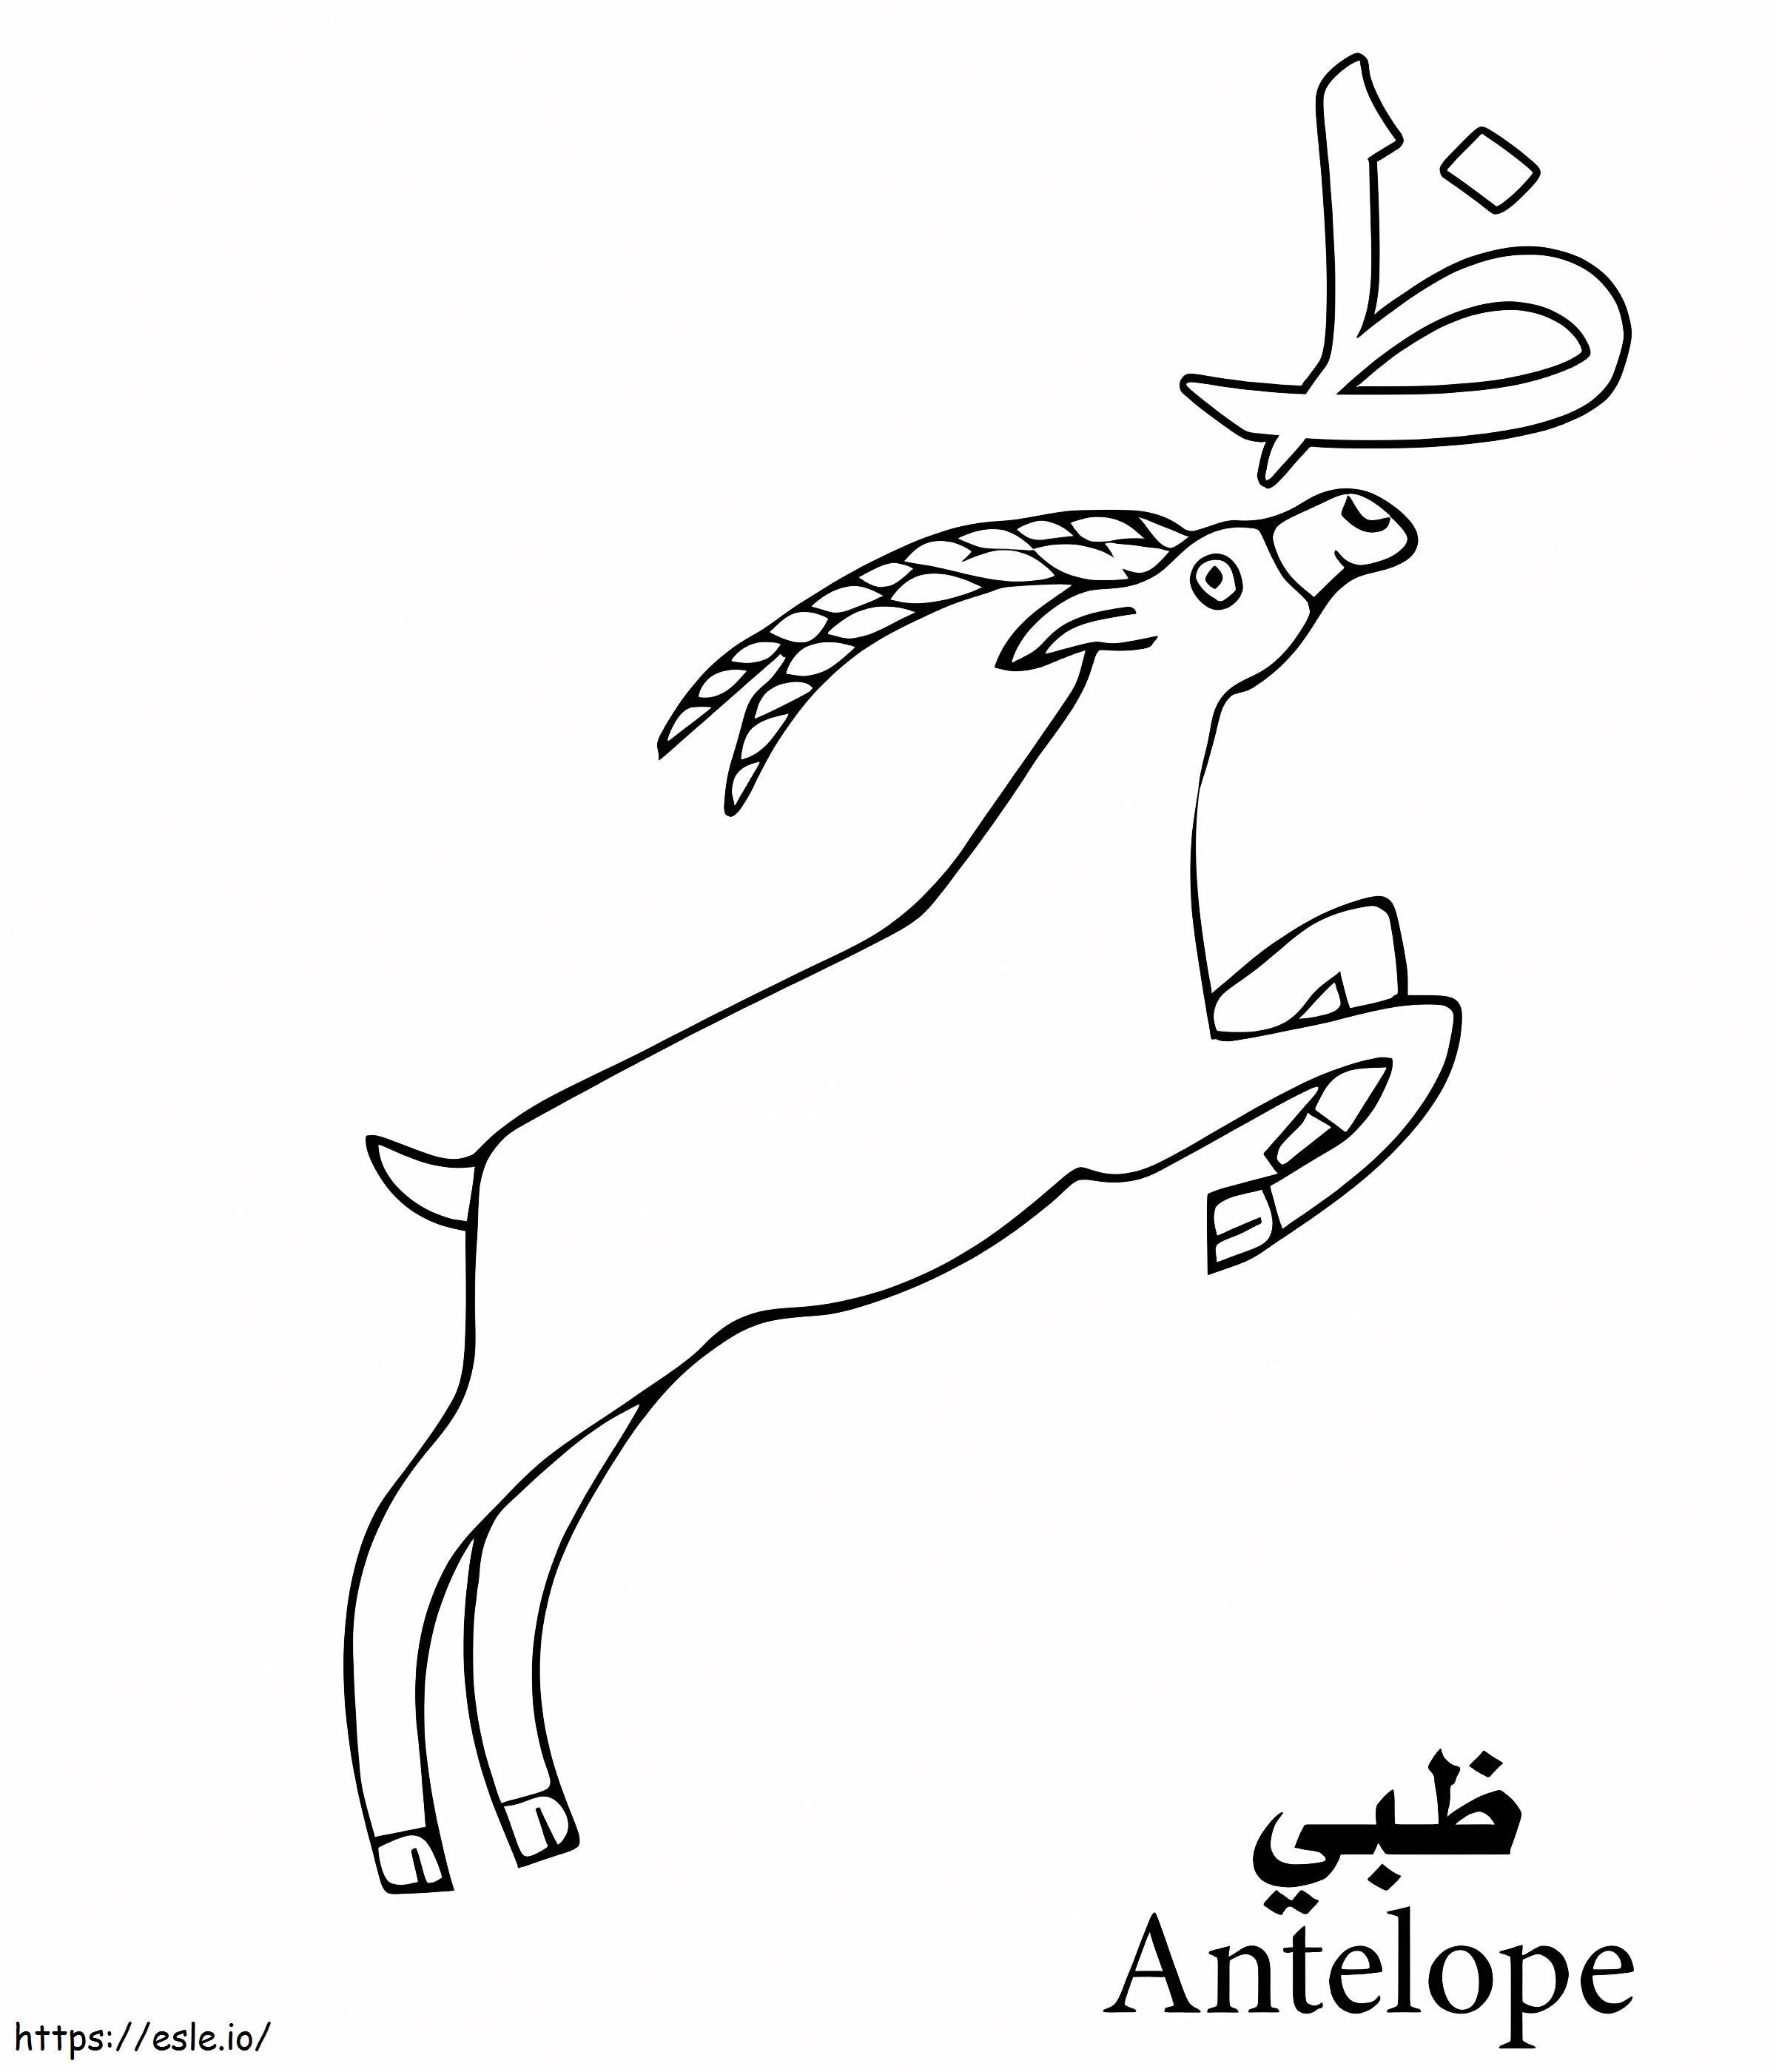 Antelope Arabic Alphabet coloring page